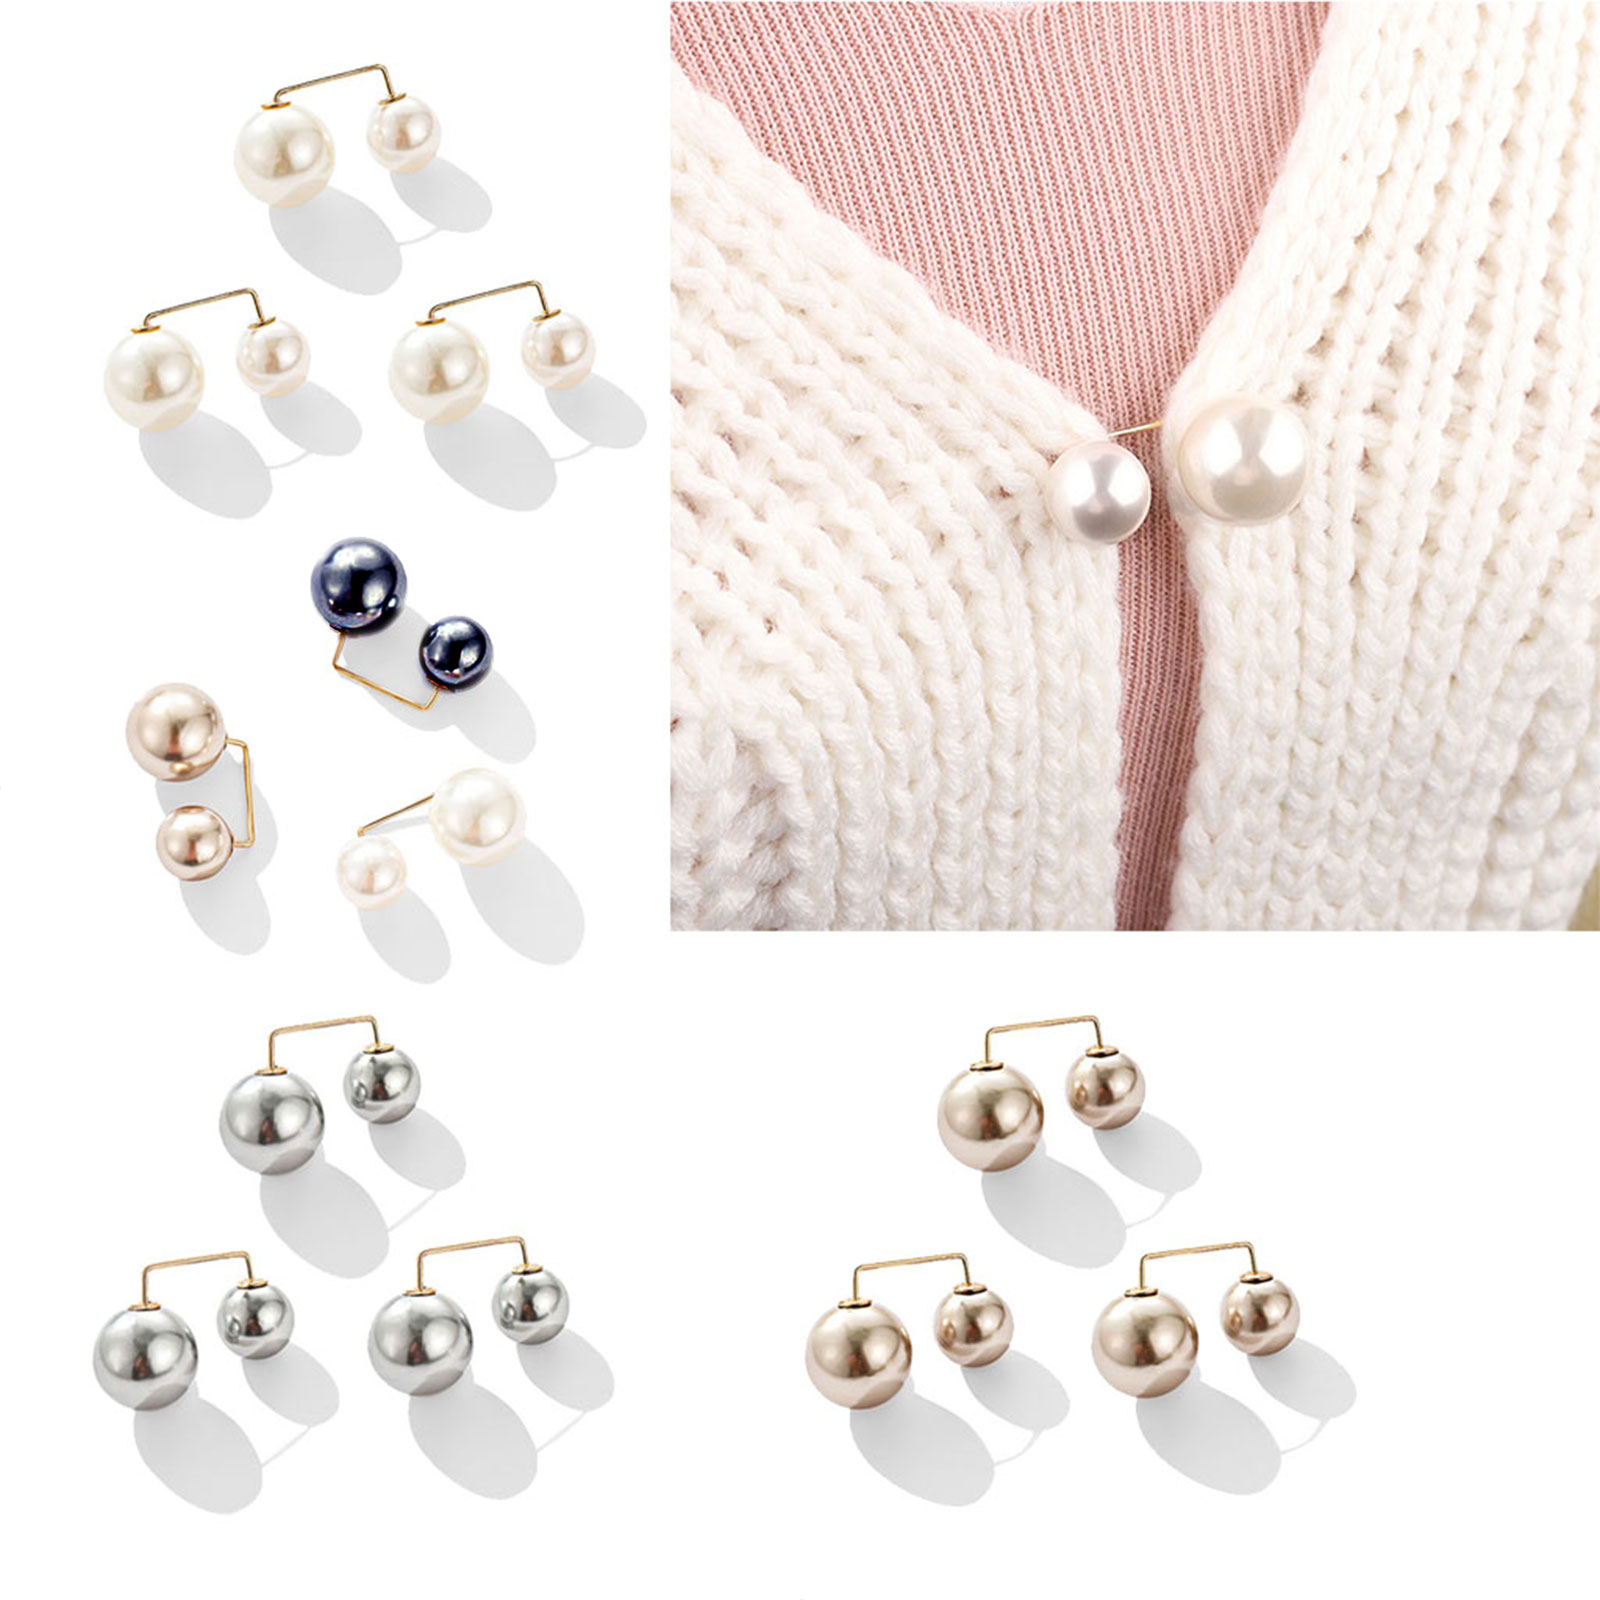 ✪ 3 Pcs/set Fashion Brooch Double Pearl Brooches for Women Metal Lapel Pin  Brooch Pins Sweater Shirt Brooch Accessories 